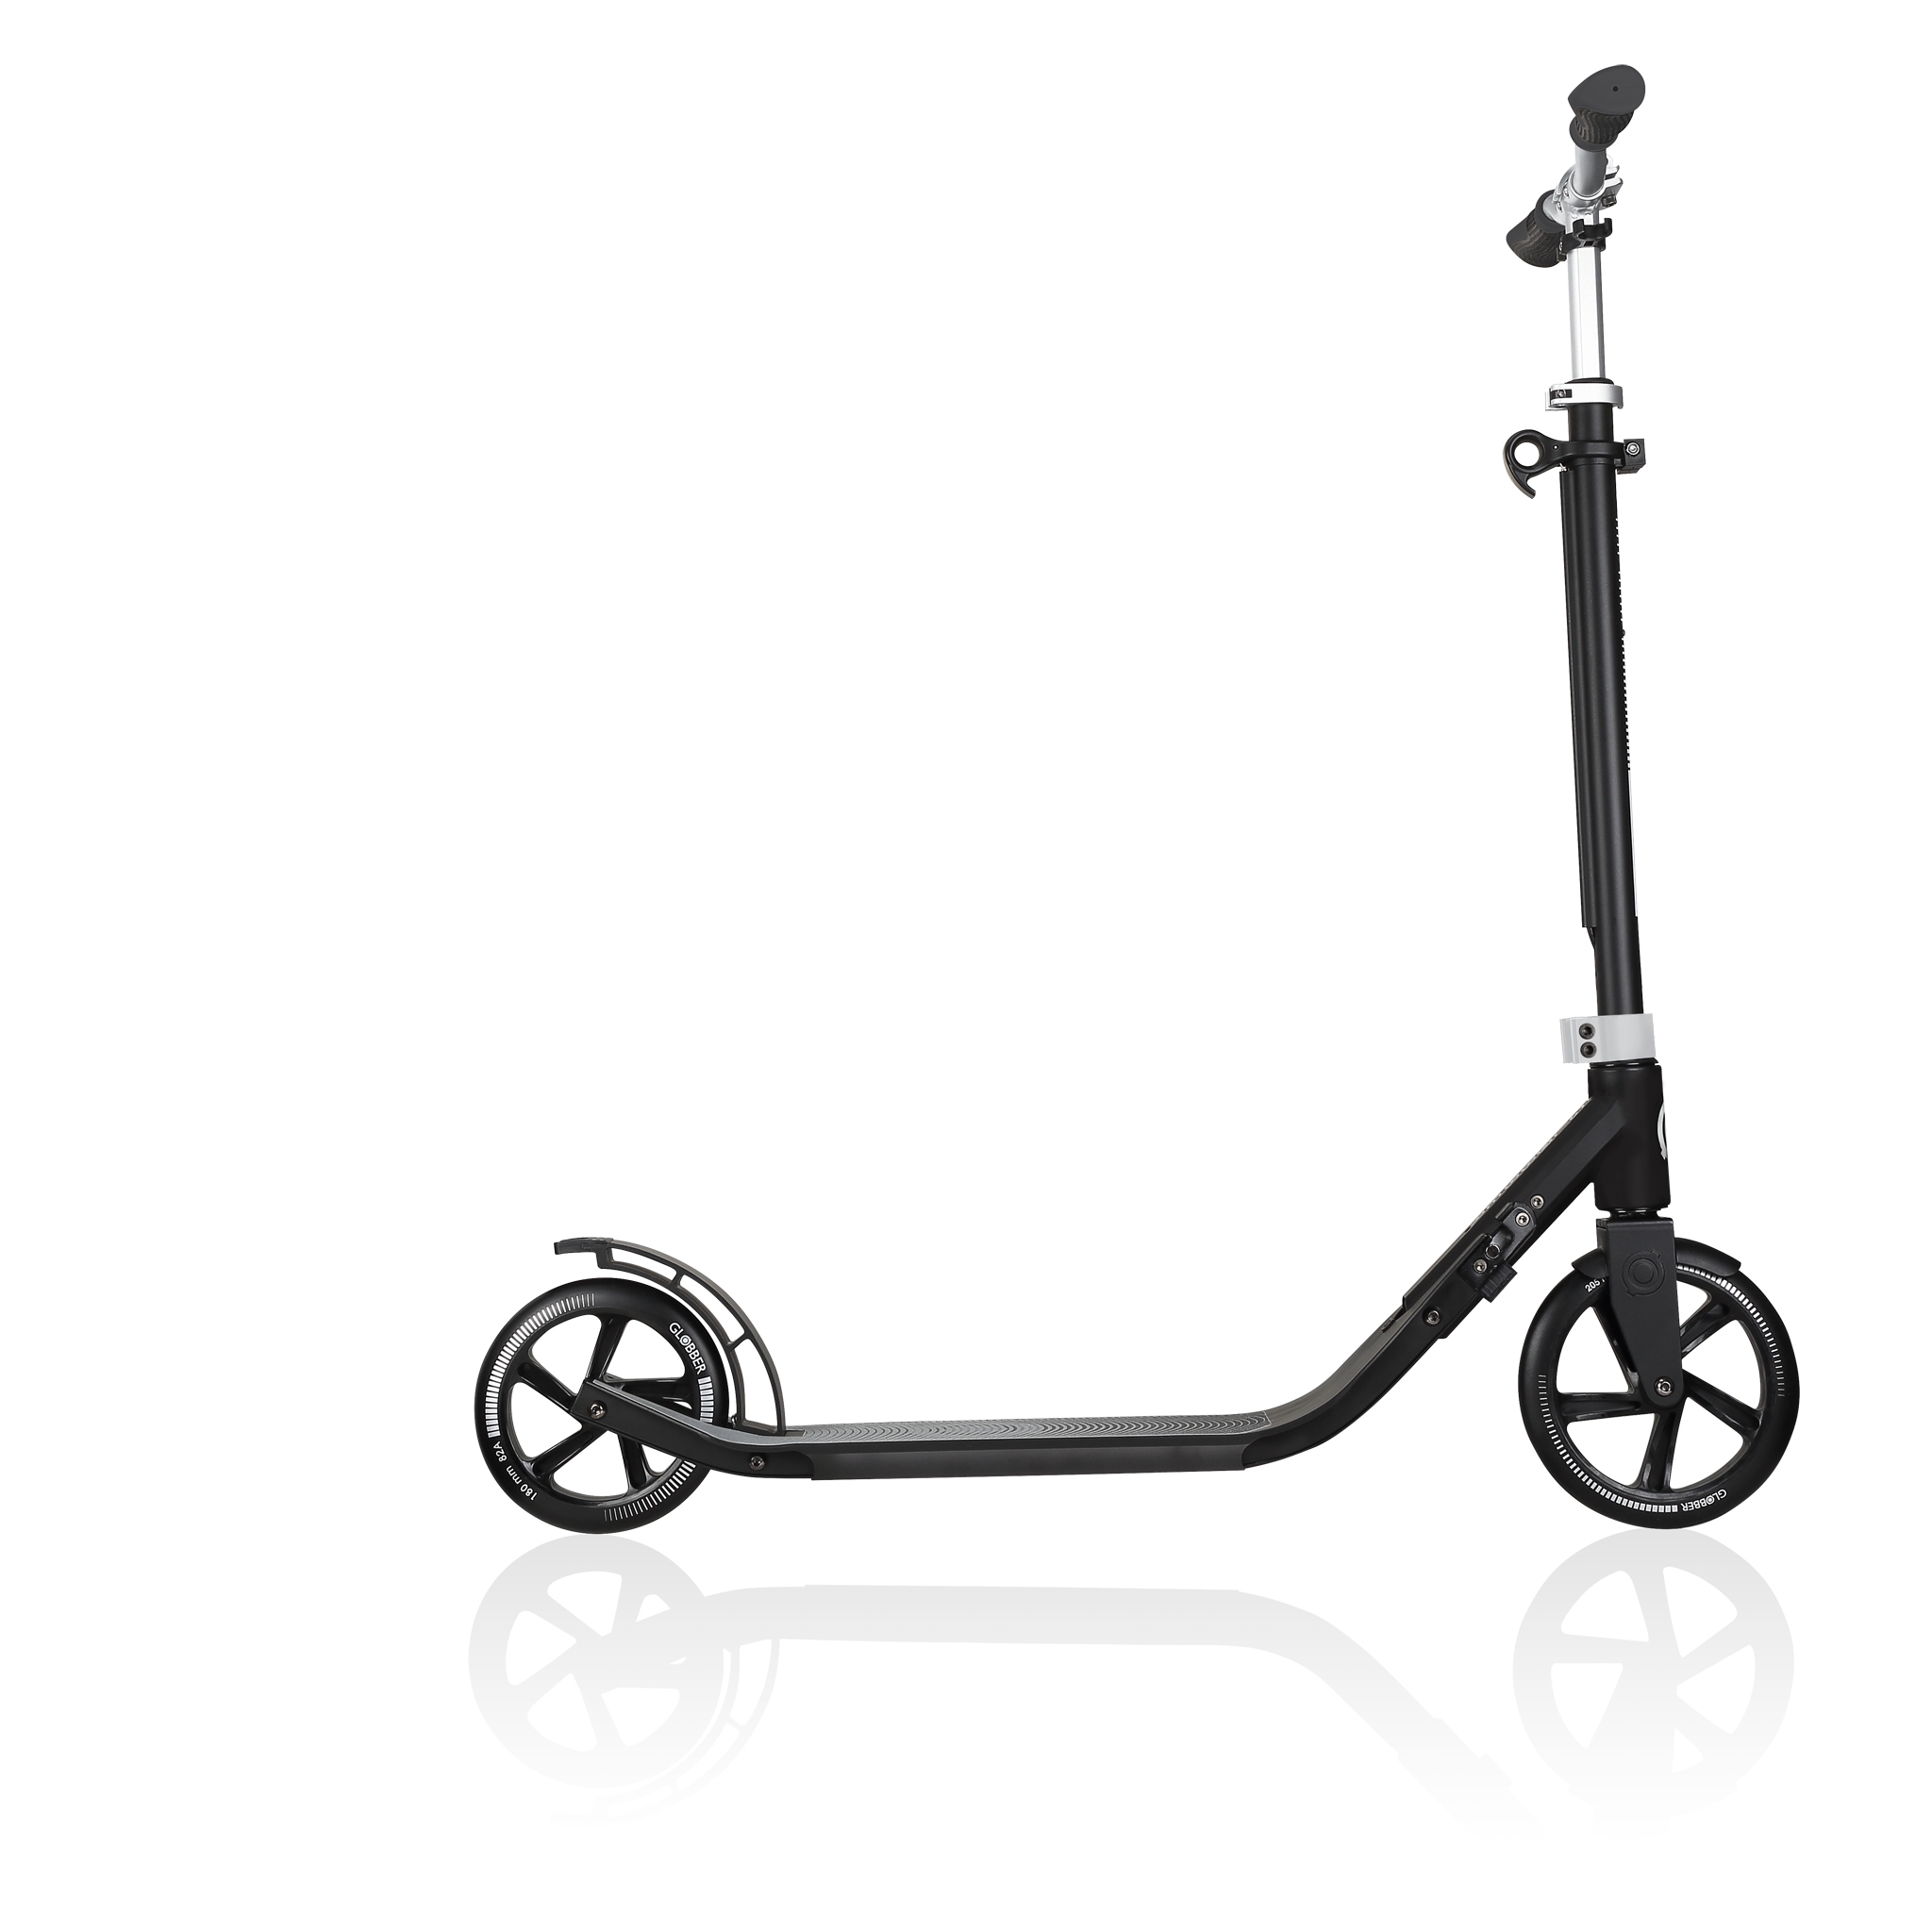 Globber-ONE-NL-205-180-DUO-2-wheel-foldable-scooter-for-adults-aluminium-deck-lead-grey 3